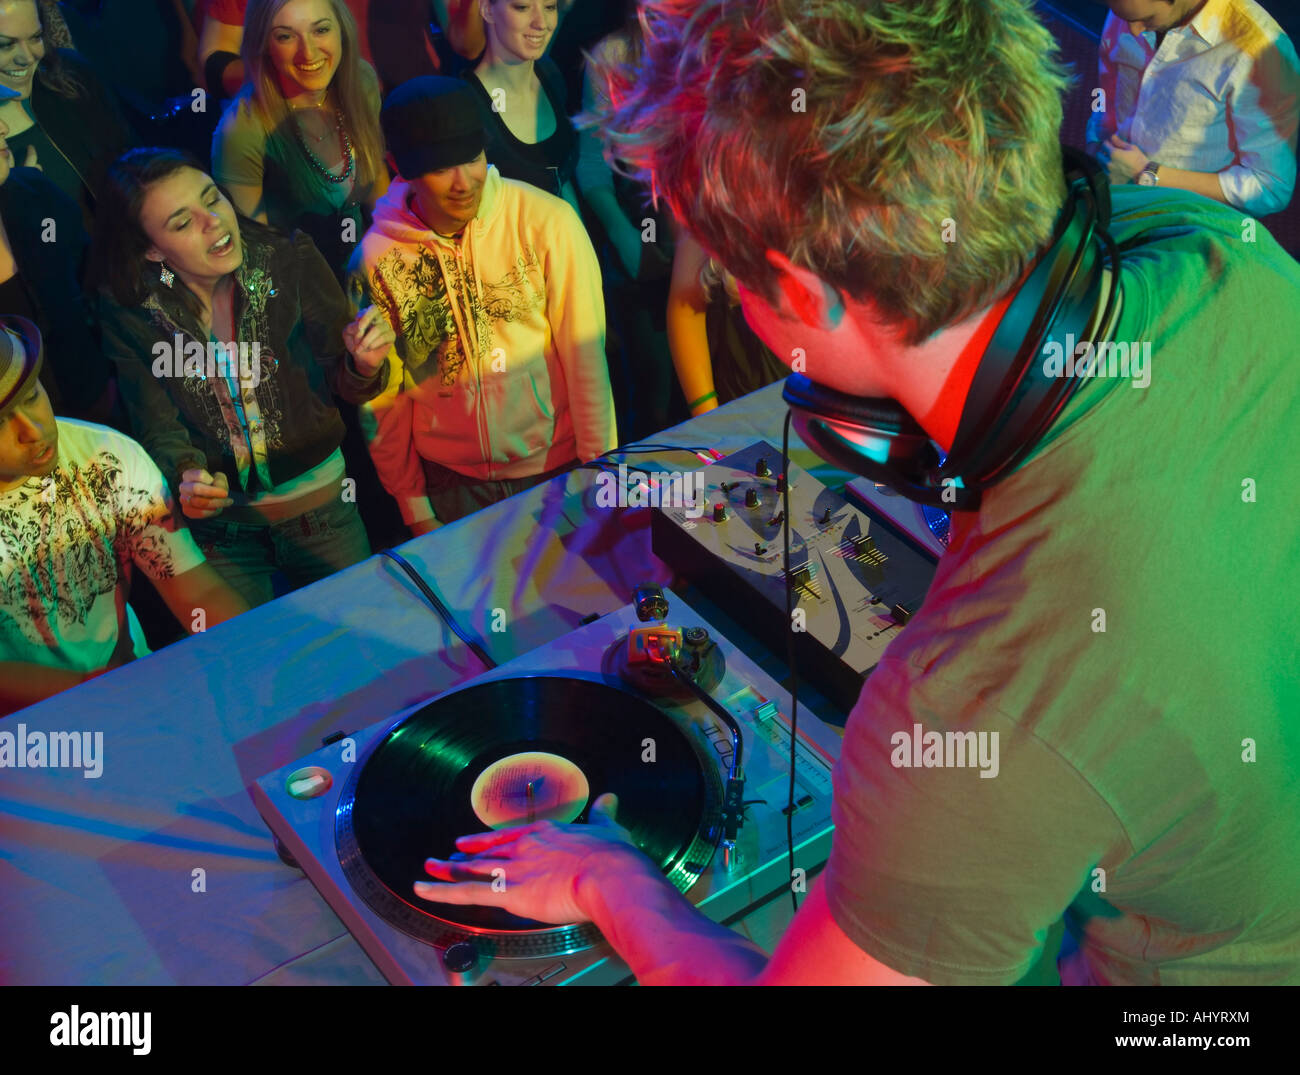 DJ playing in front of crowd Stock Photo